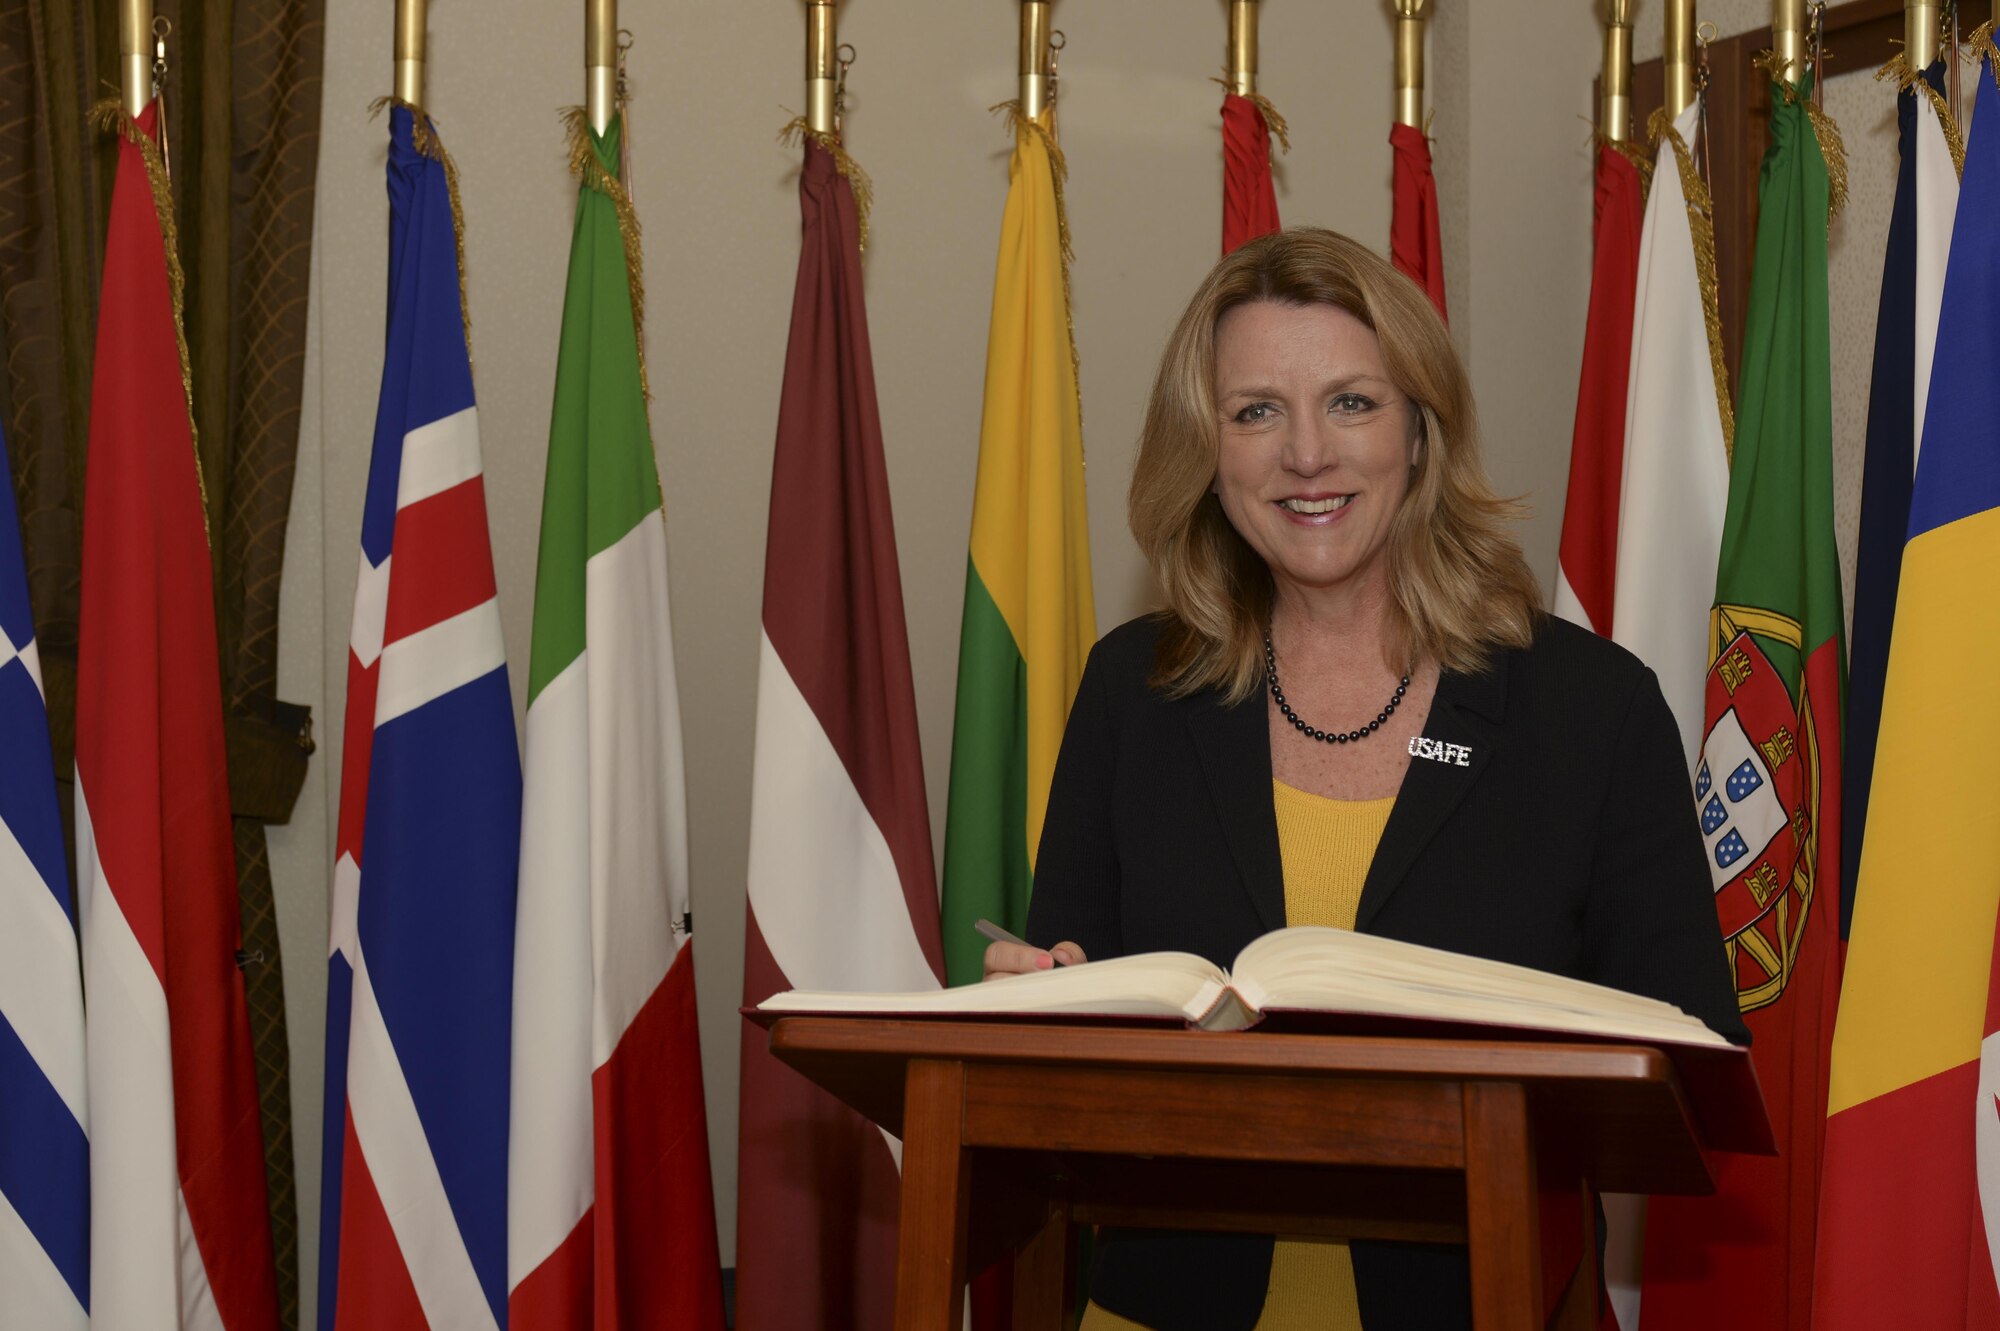 Secretary of the Air Force Deborah Lee James smiles as she signs a visitor book in the office of the commander of Supreme Allied Command, Europe, during her visit to Supreme Headquarters Allied Powers Europe at Mons, Belgium, June 23, 2015. The secretary completed a visit of installations through Europe June 24, 2015, to meet Airmen, community leaders and allied and partner nation defense chiefs. (U.S. Air Force photo/Staff Sgt. Joe W. McFadden)